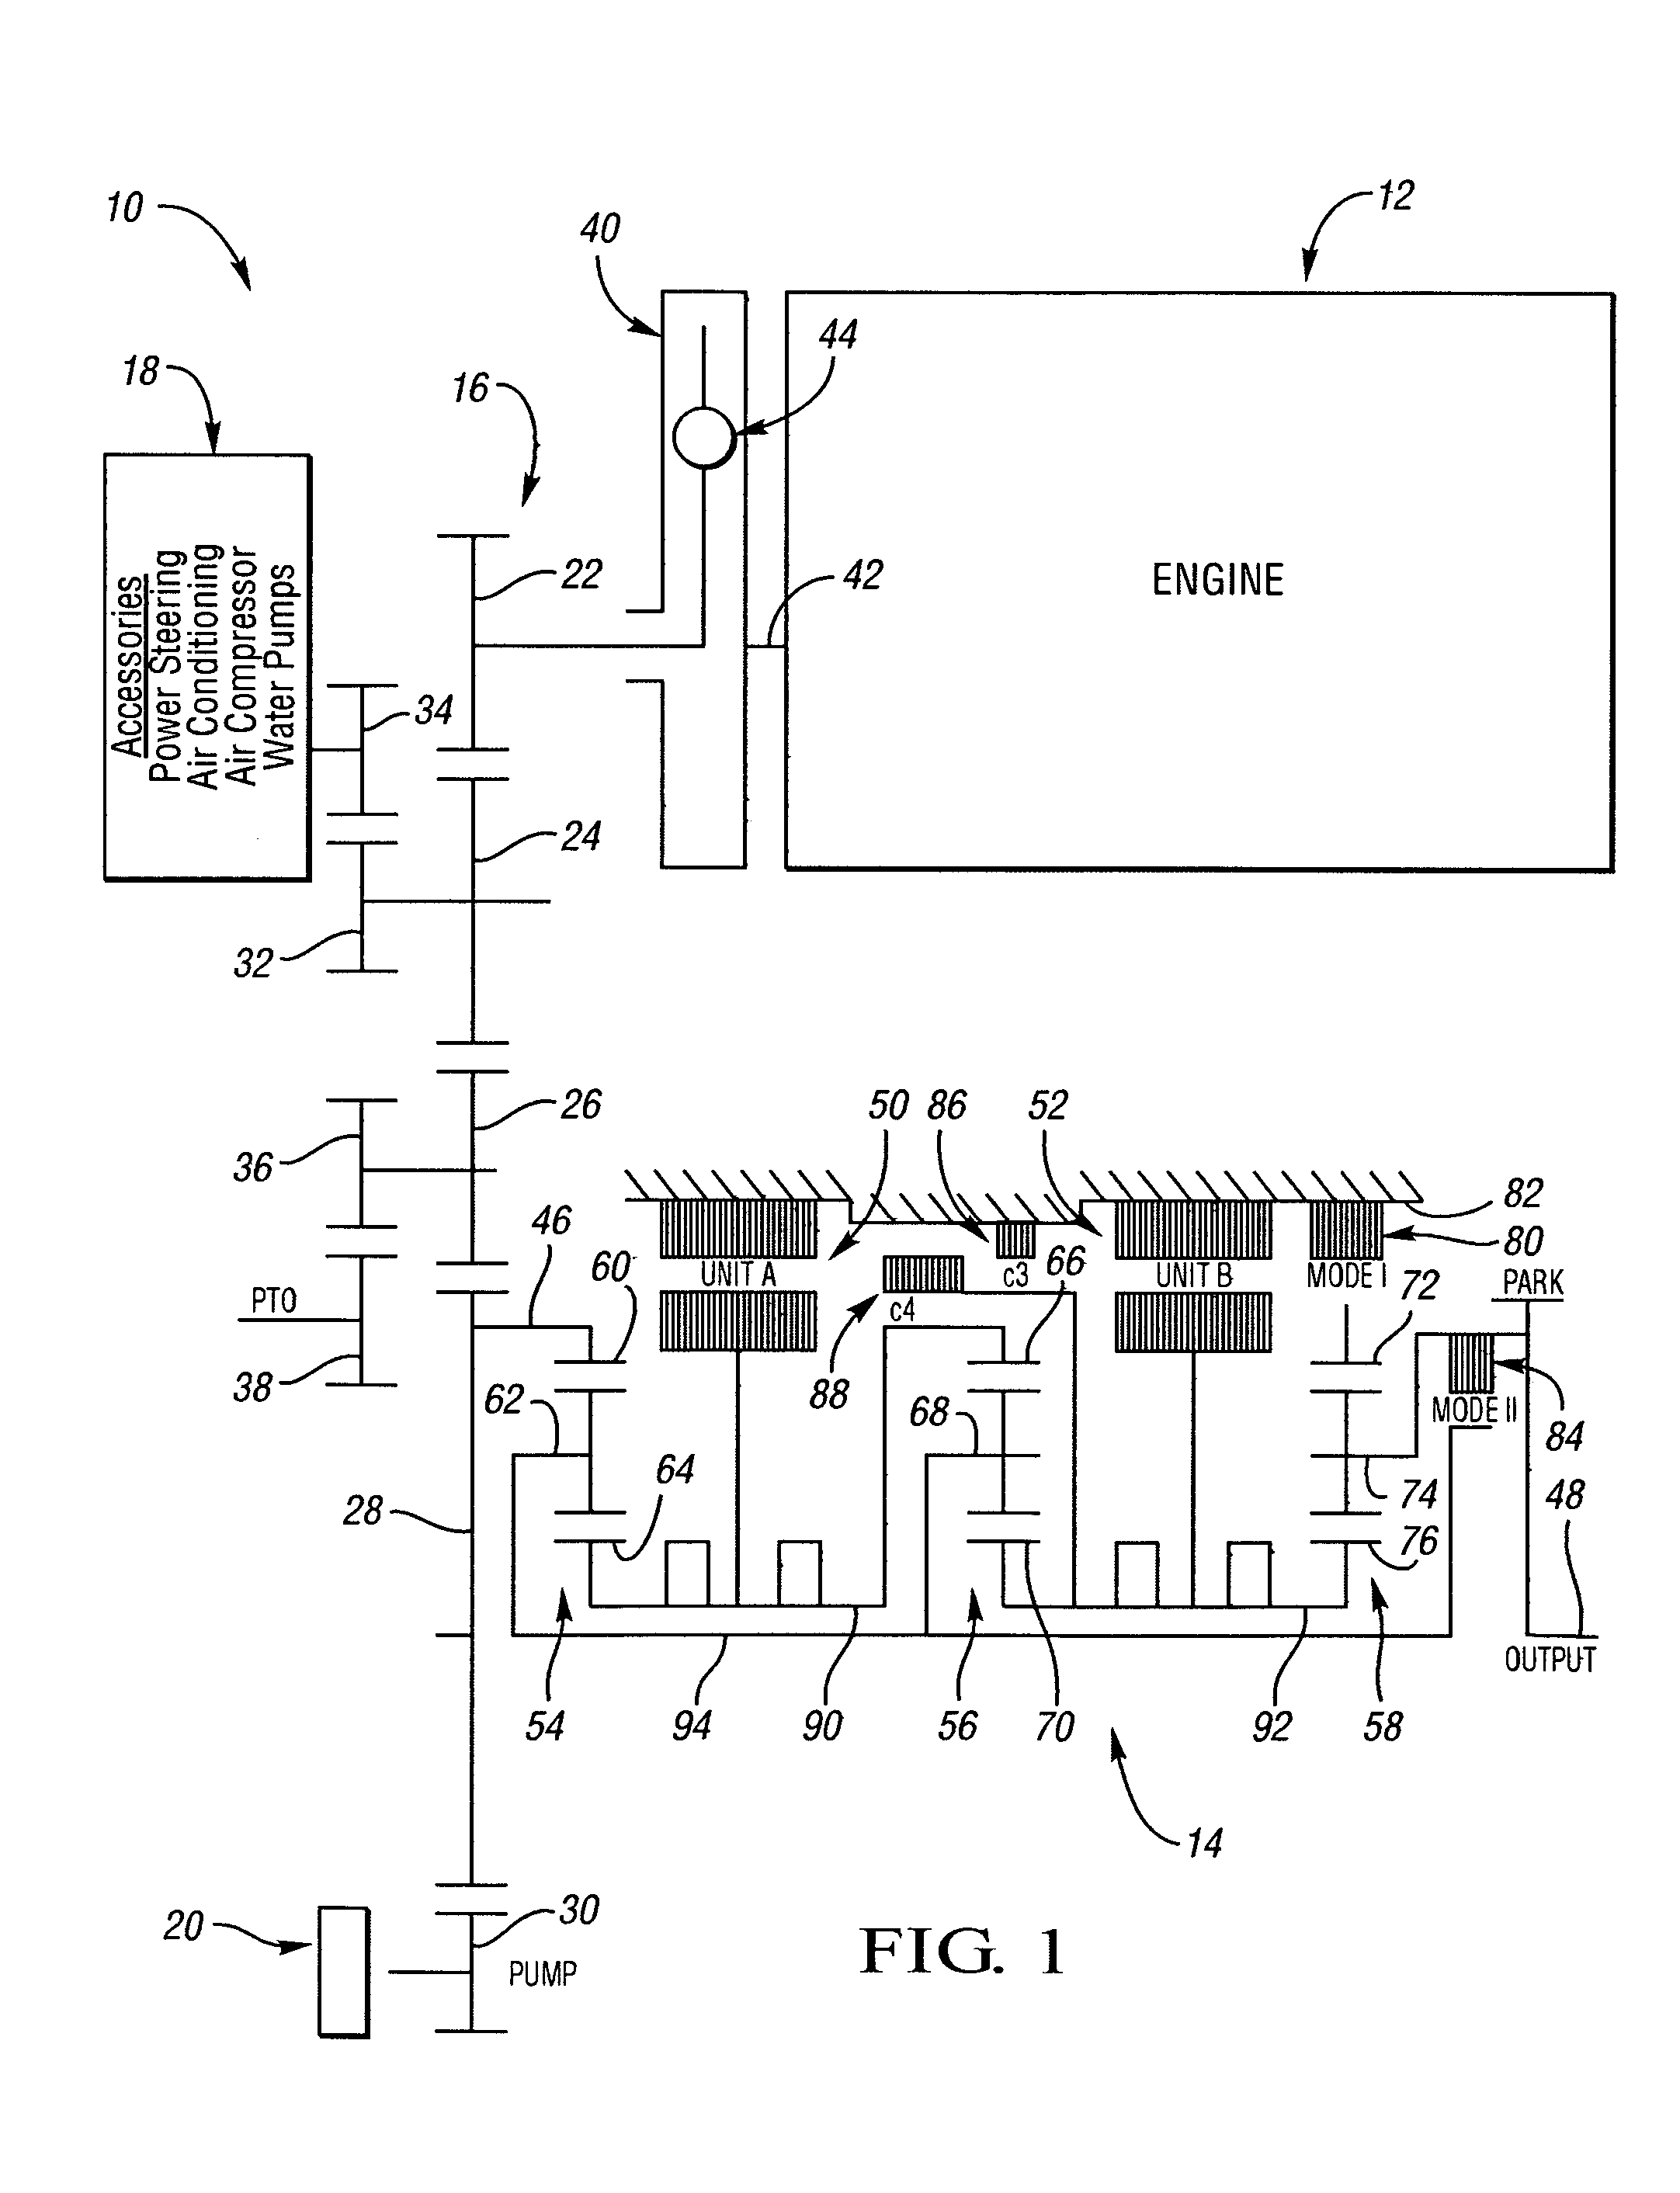 Powertrain including input disconnect and accessory drive system for an electrically variable transmission